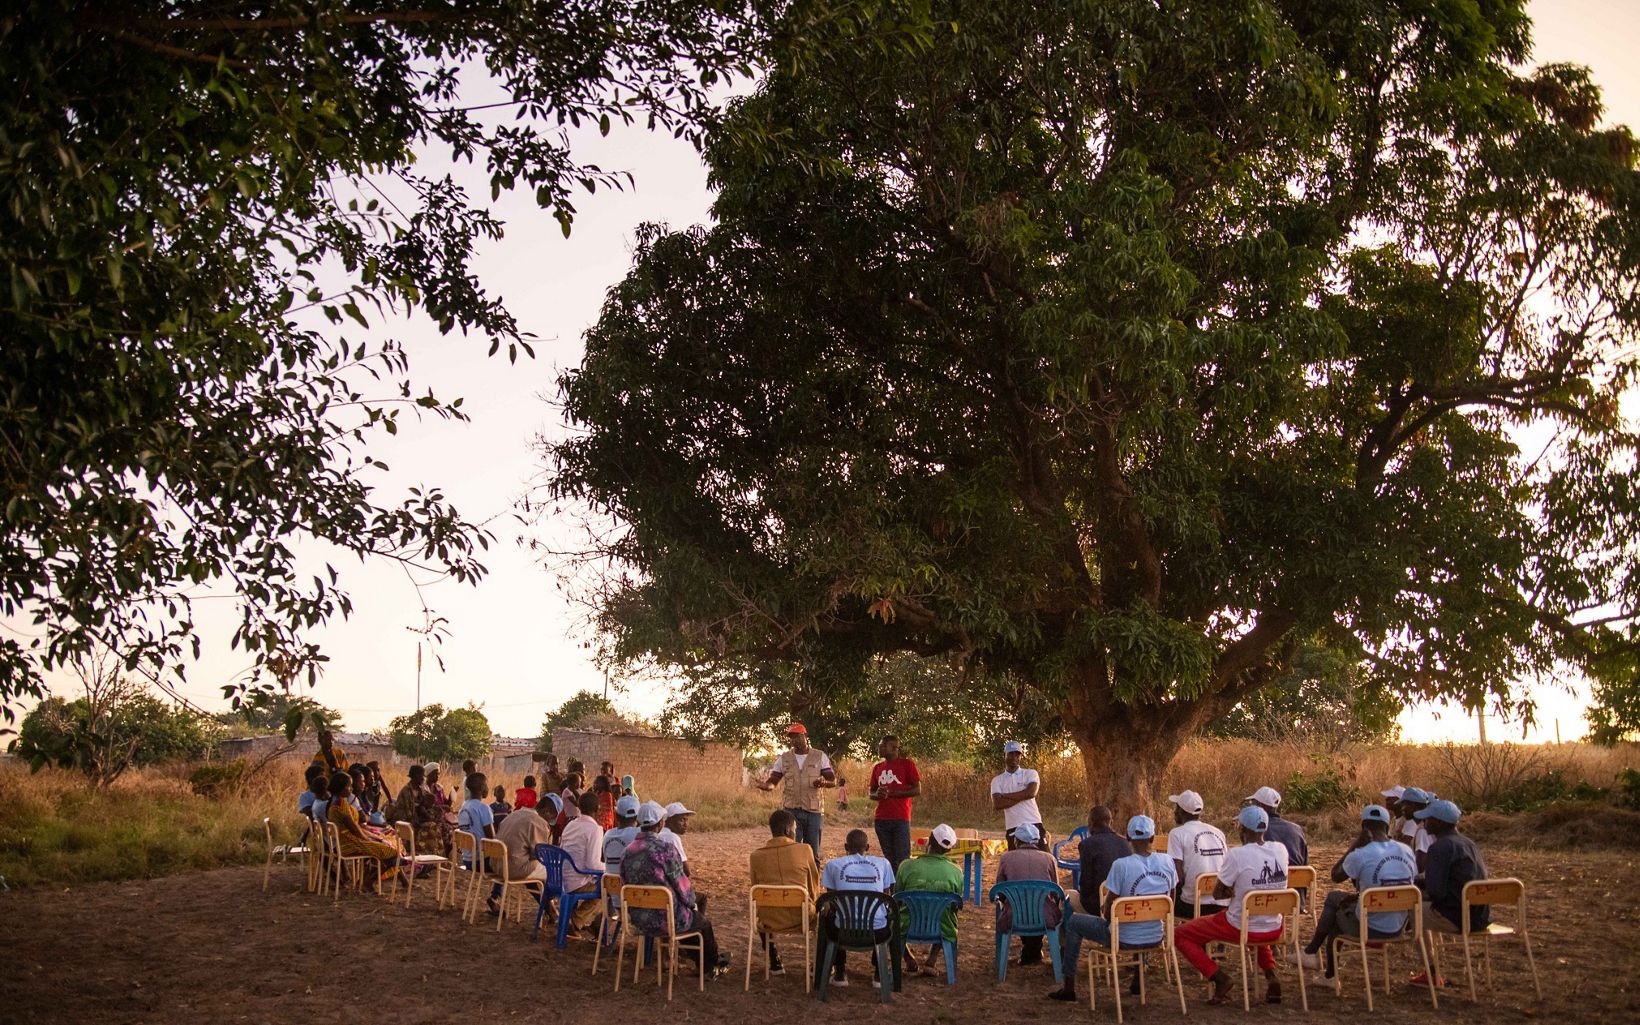 Large group of people seated under a tree